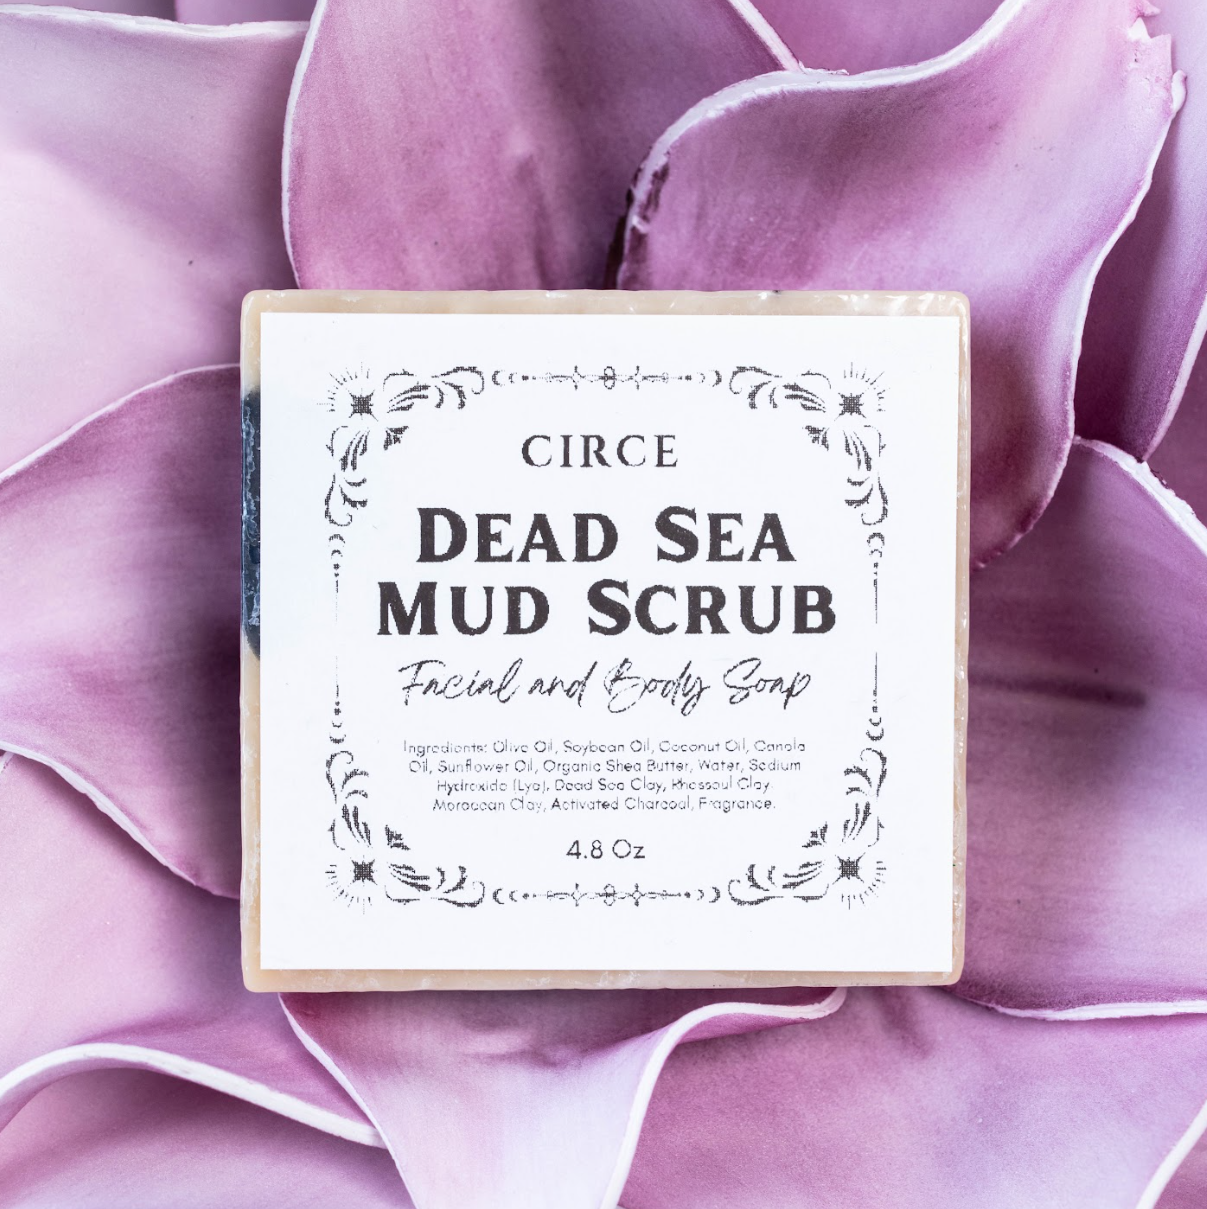 Facial & Body Soaps By Circe - 6 Nourishing Blends  from Circe Boutique